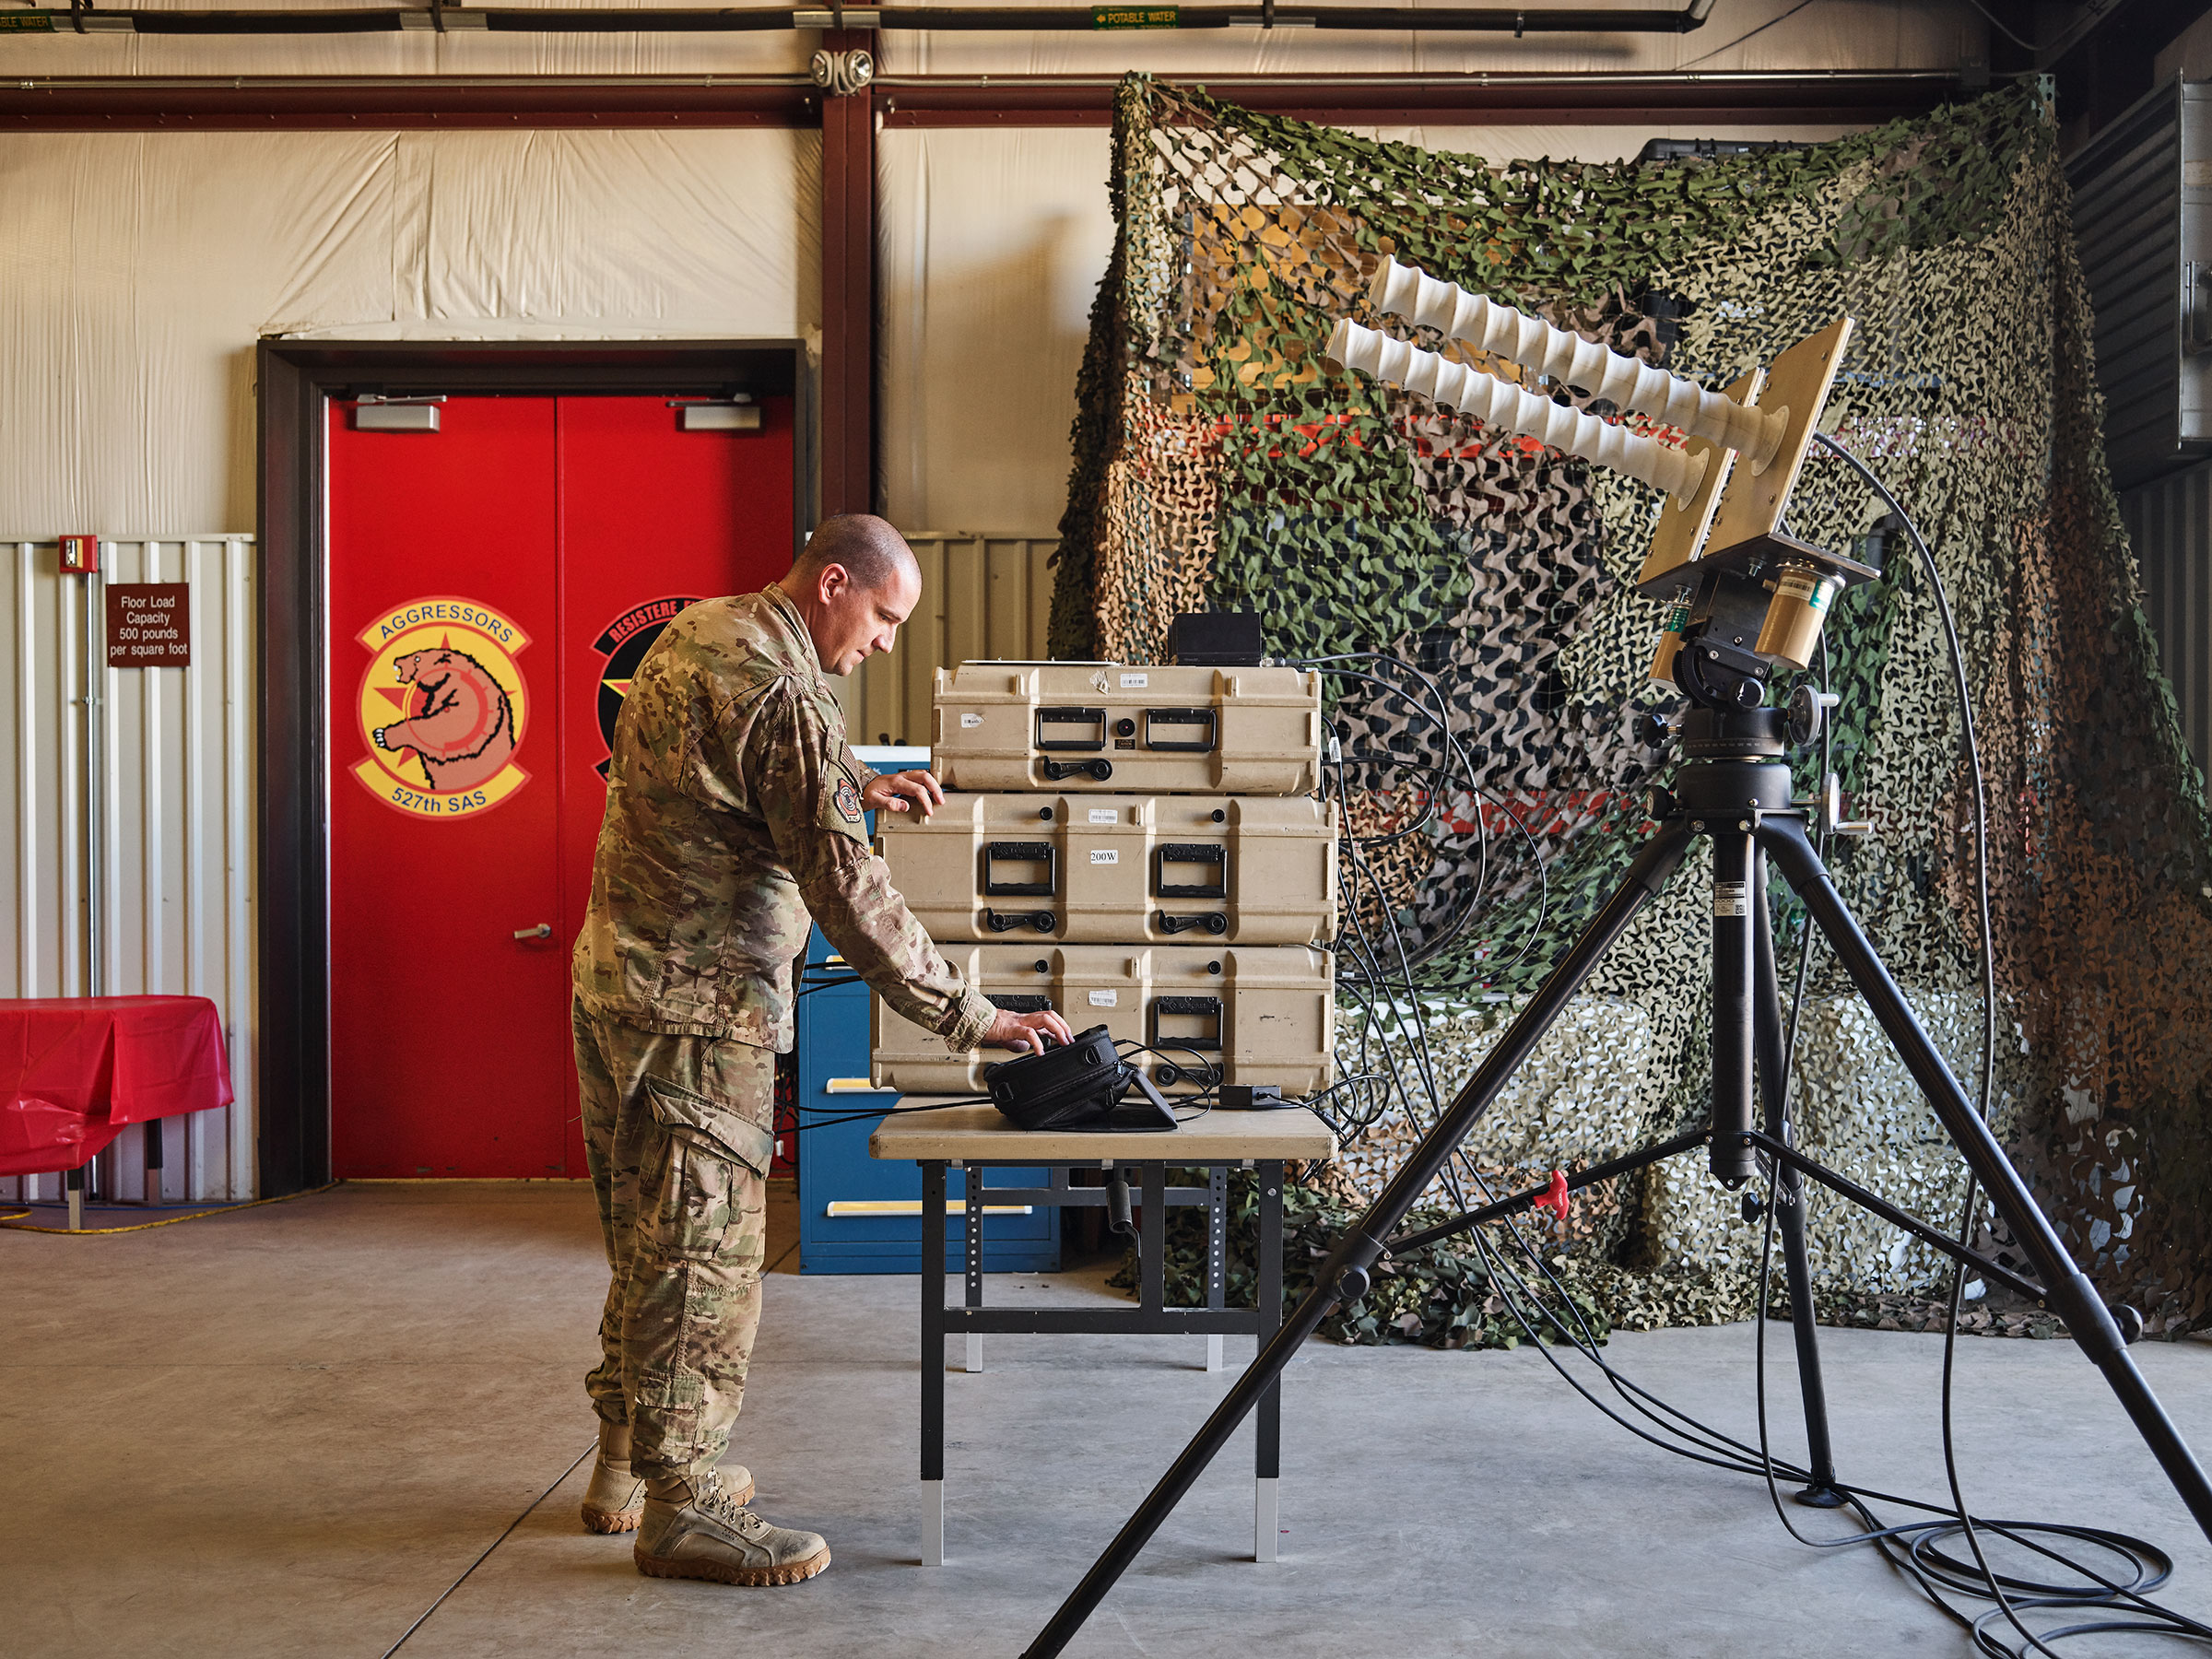 Helical antenna used to scramble adversaries GPS signals in combat. (Spencer Lowell for TIME)